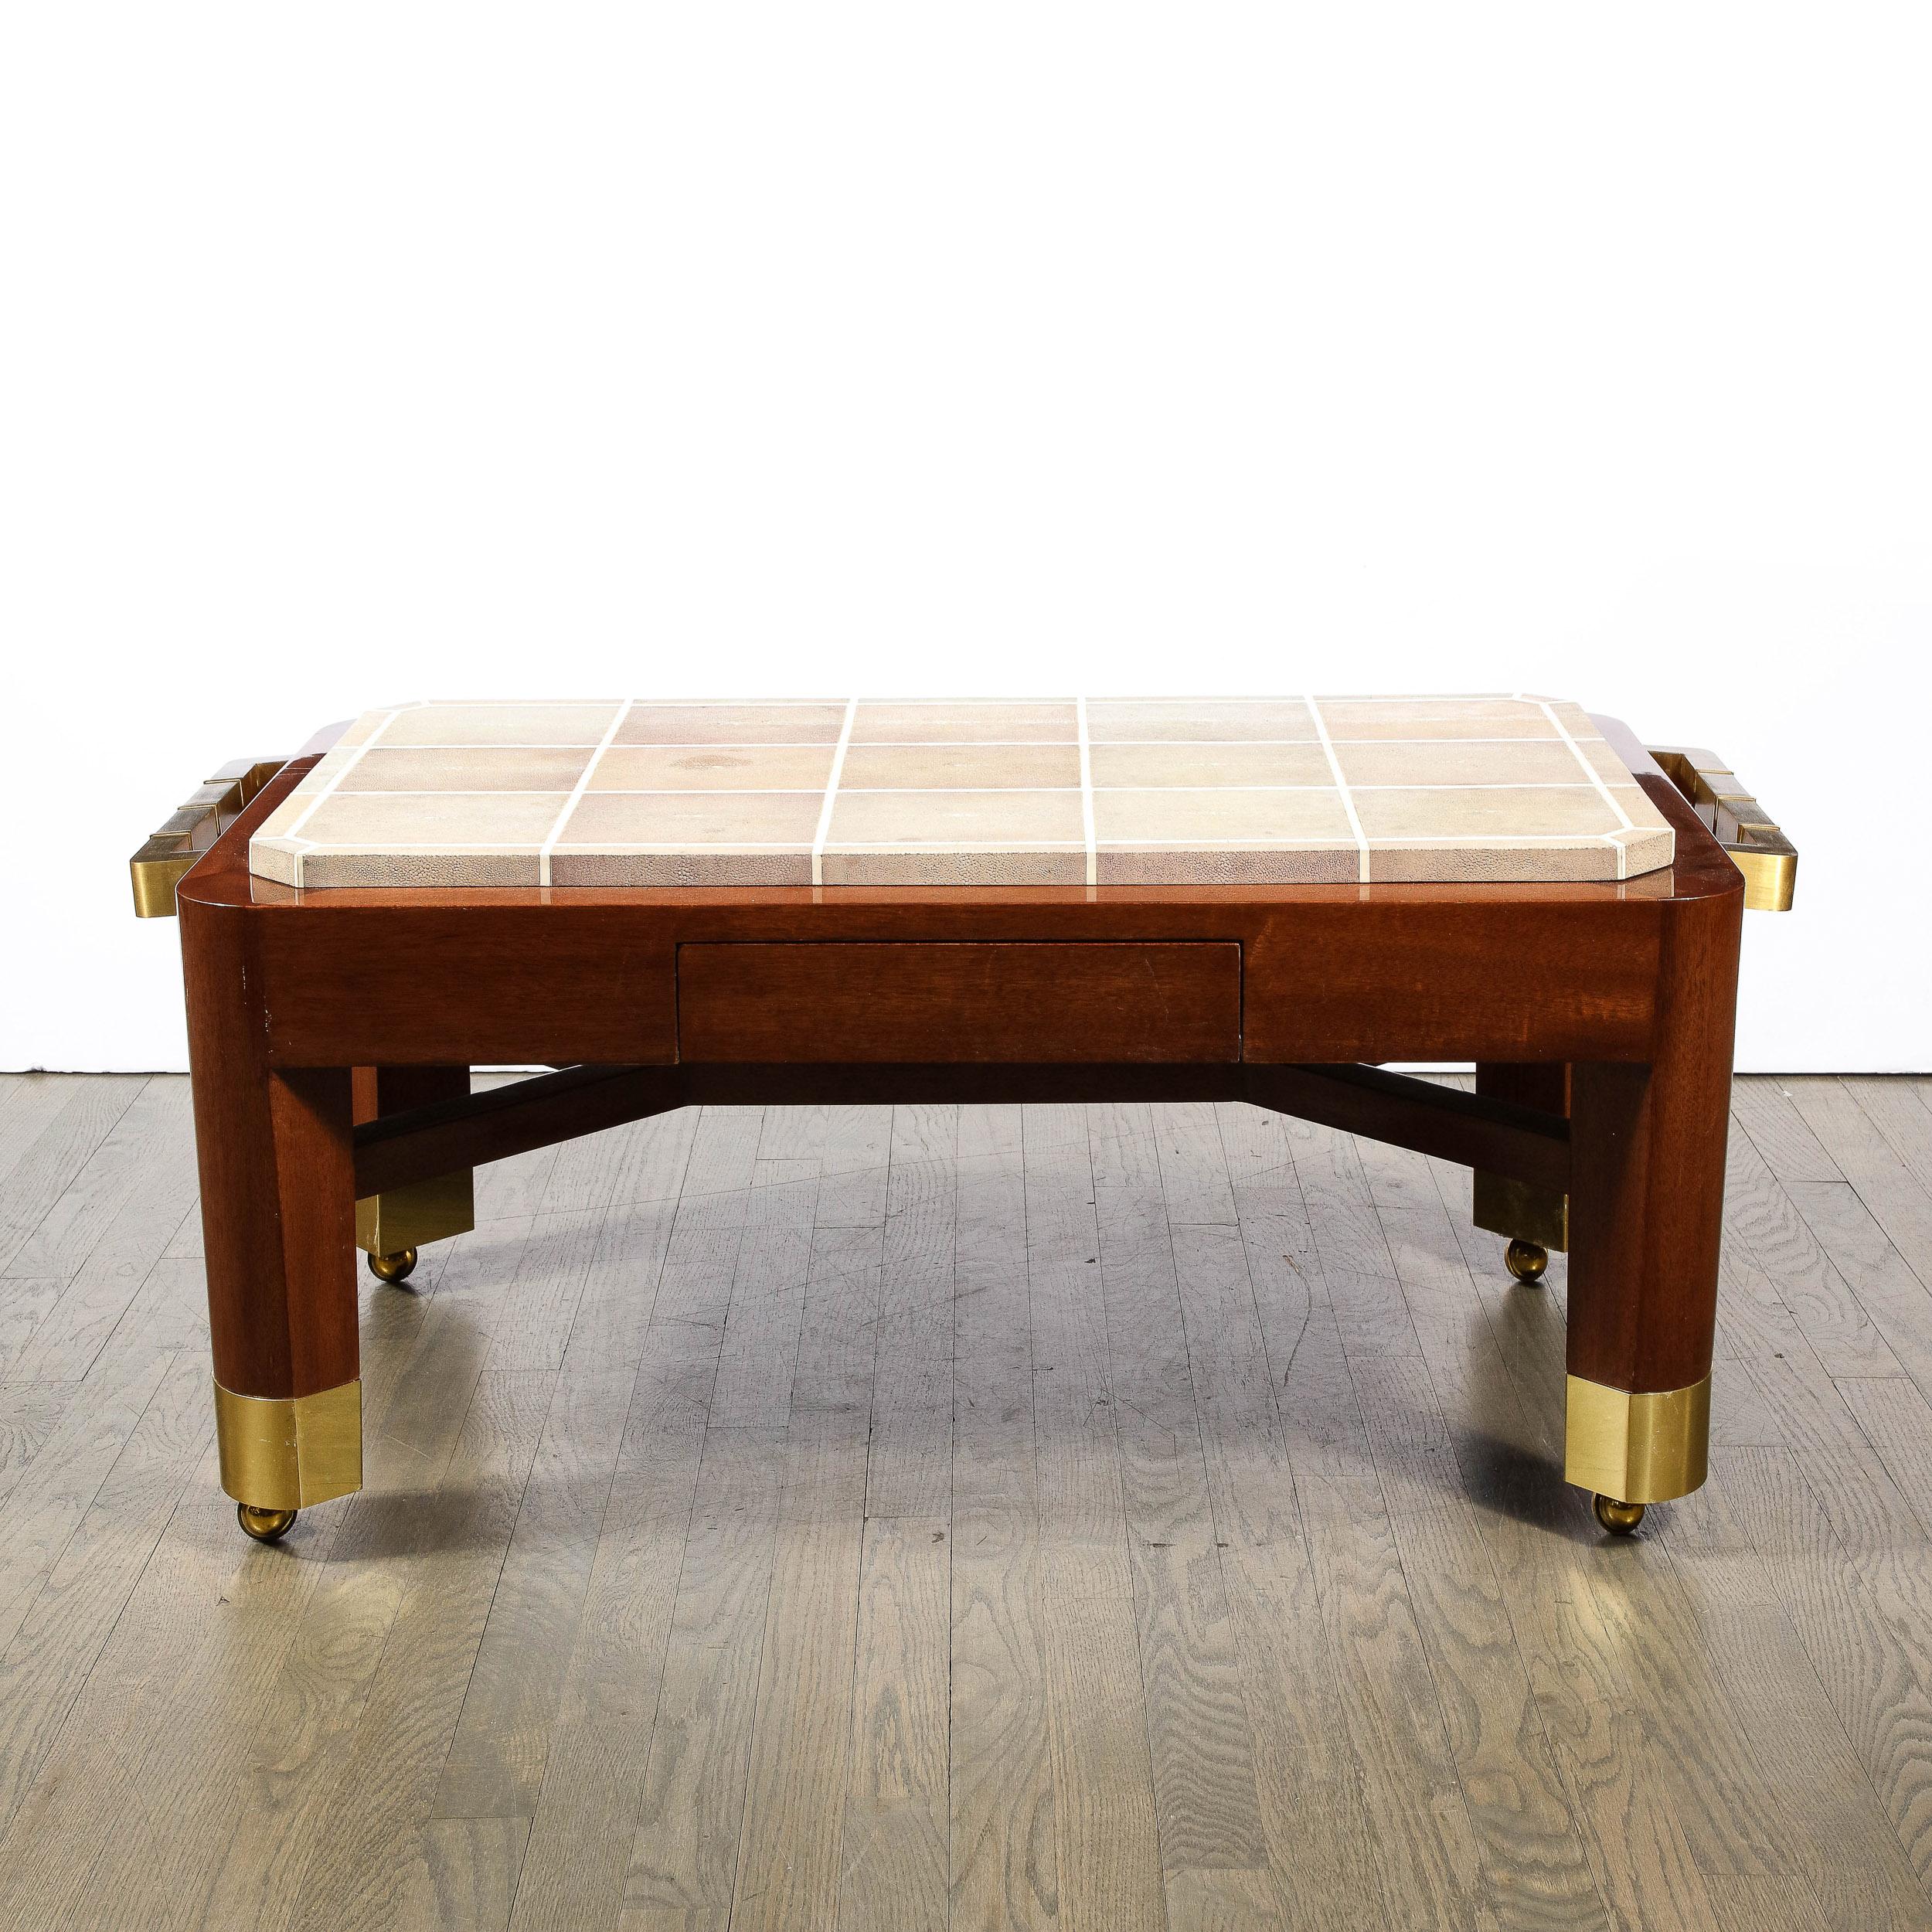 This stunning and dramatic modernist cocktail table was realized by the esteemed 20th century designer Lorin Marsh in the United States circa 1987. Sittings on brass castors, the piece offers cylindrical mahogany  legs capped in brass with a